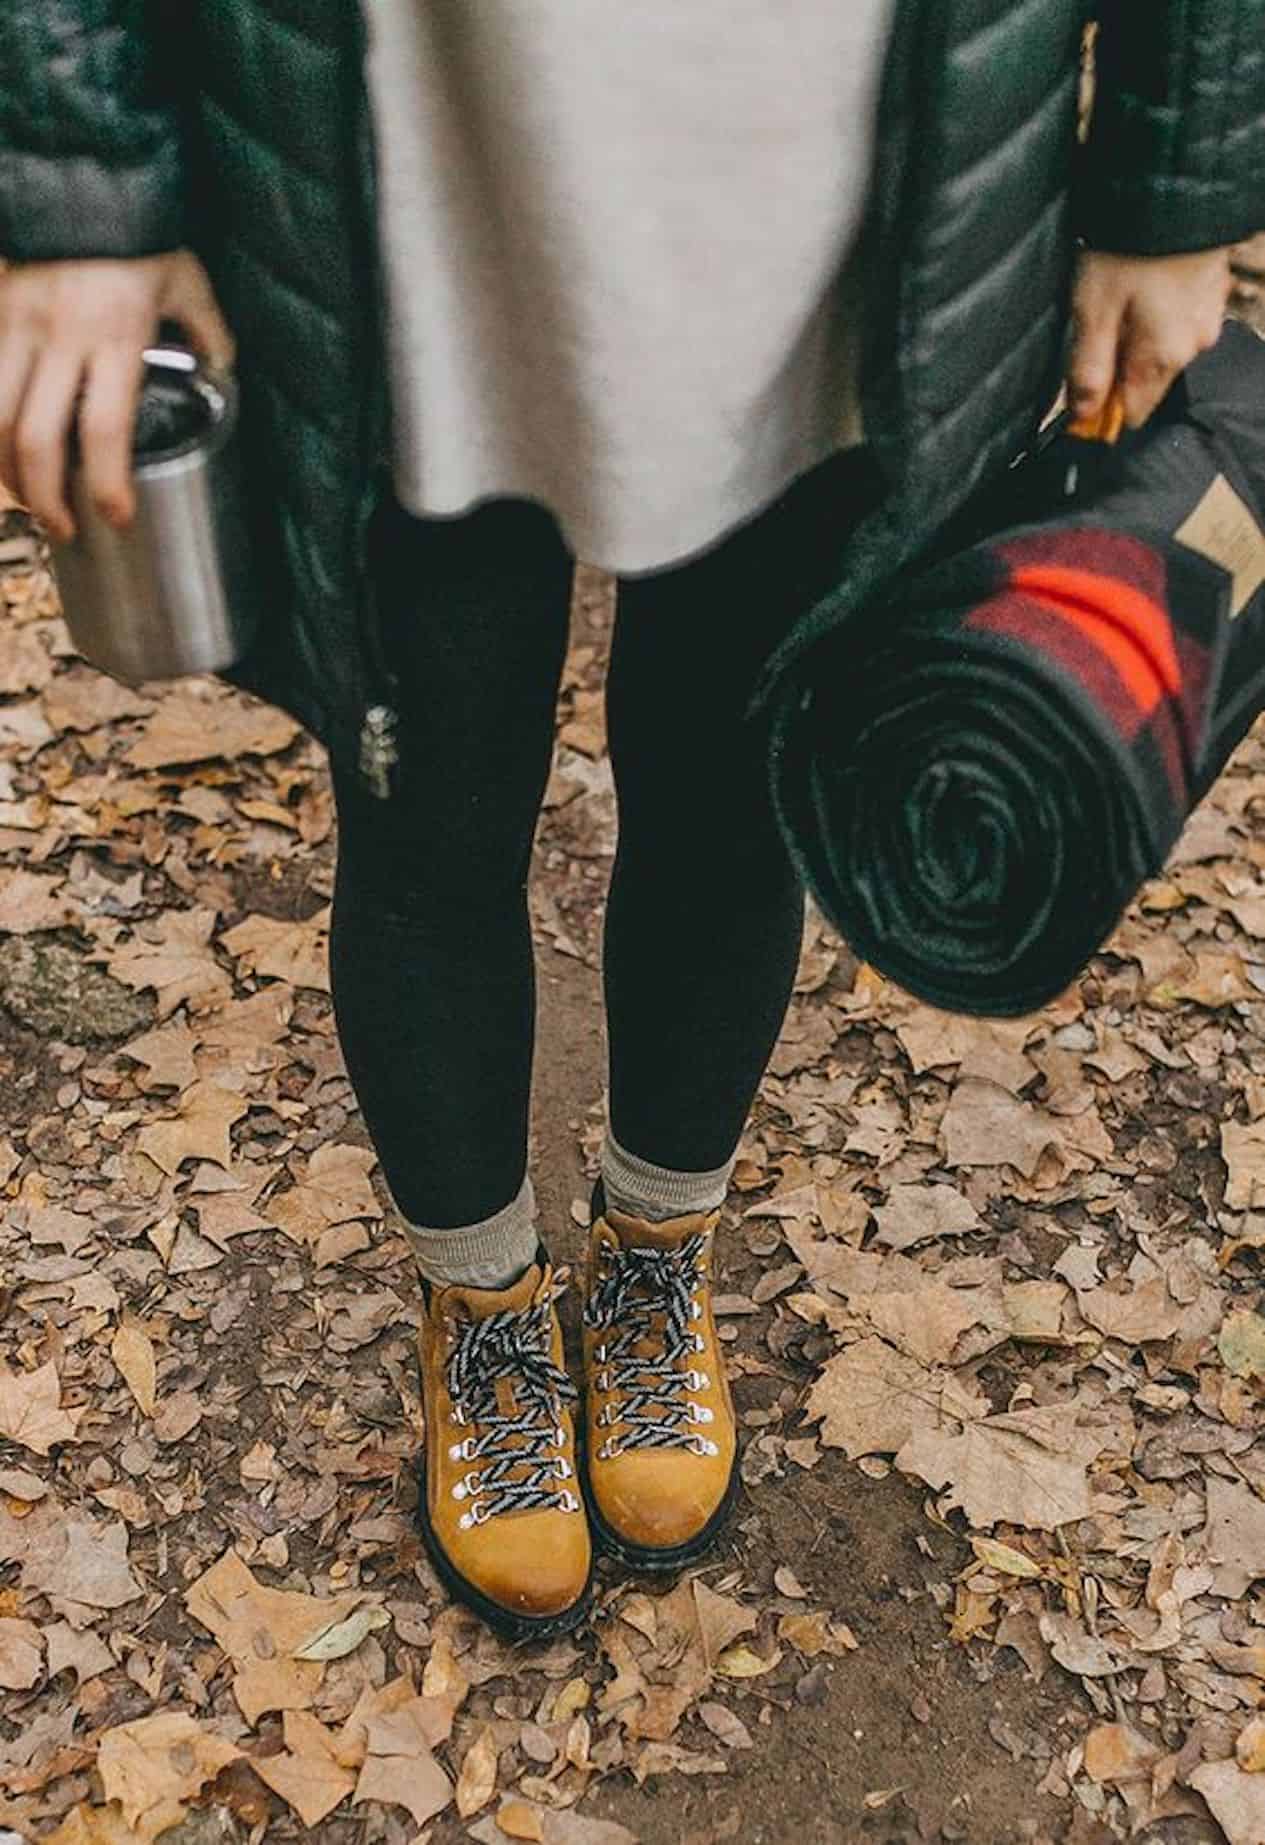 Girl wearing black leggings, hiking boots, and a black puffer jacket.